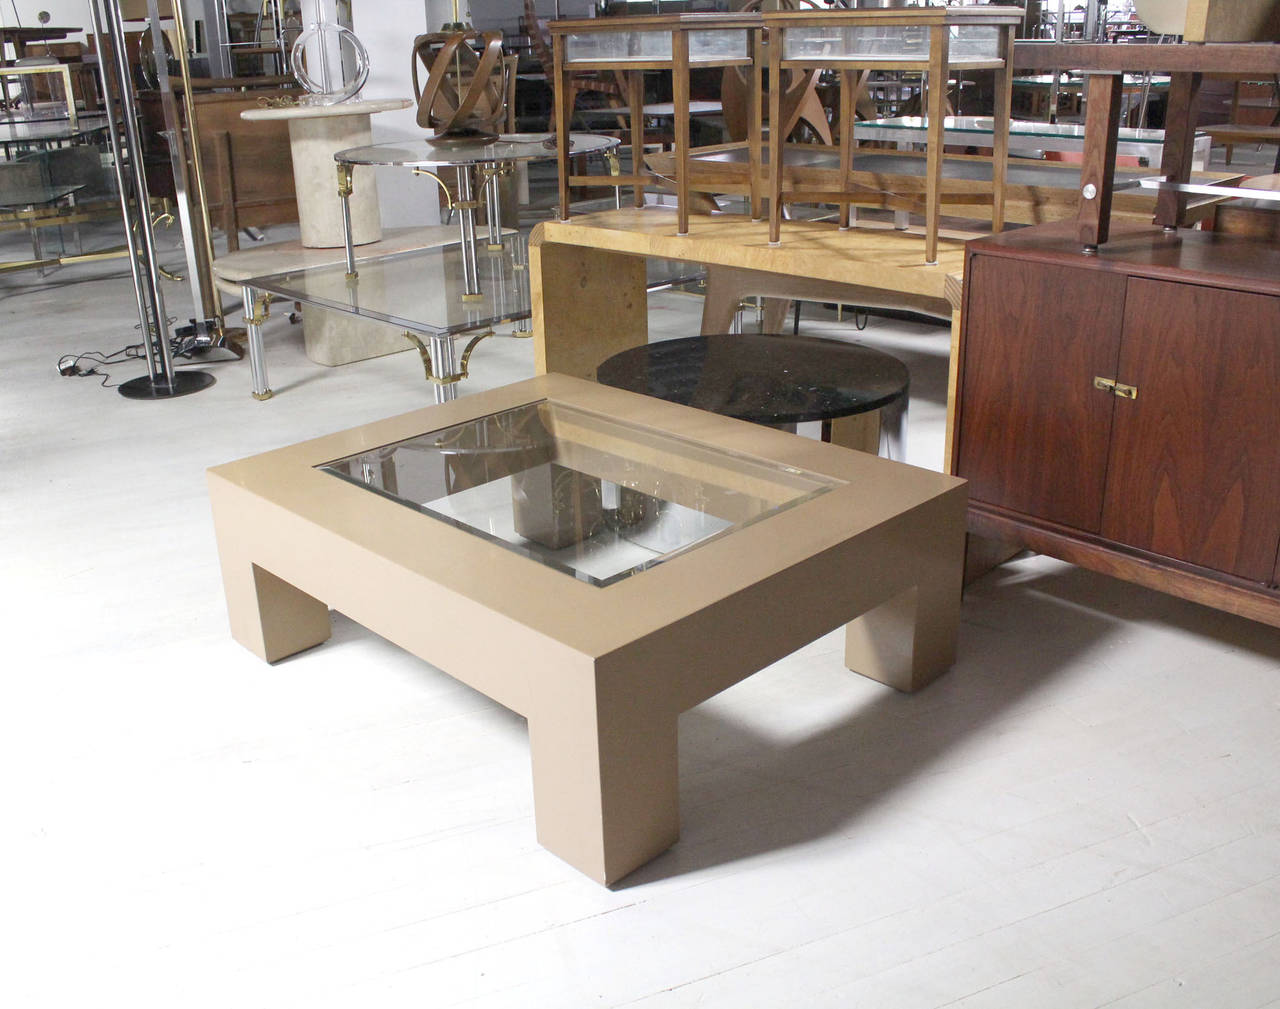 Nice mid century modern beige lacquered base coffee table in style of M. Baughman. Heavy square legs. Nice center statement piece.